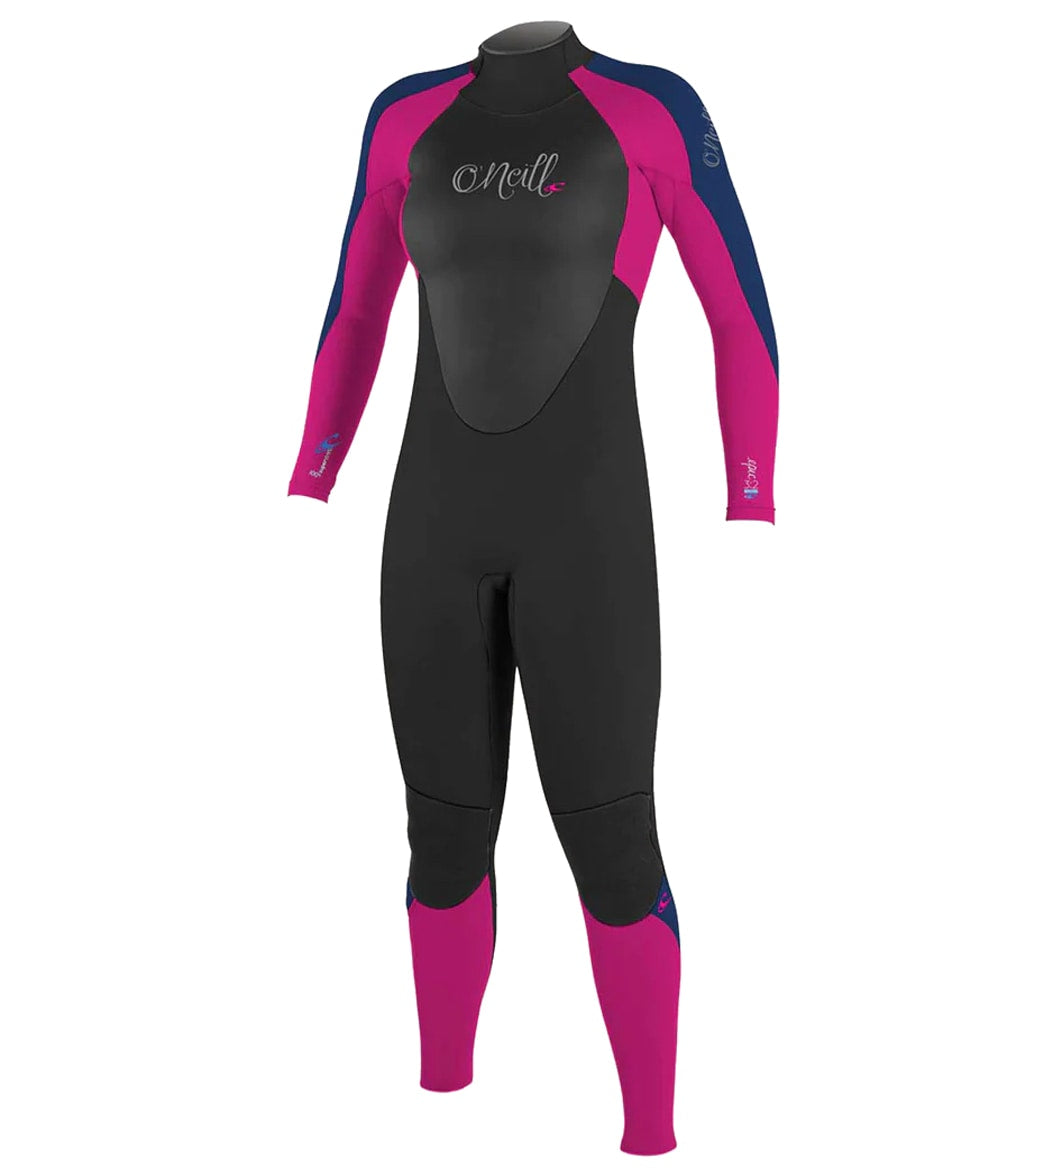 ONeill Girls Epic-2 3/2 CT Wetsuit